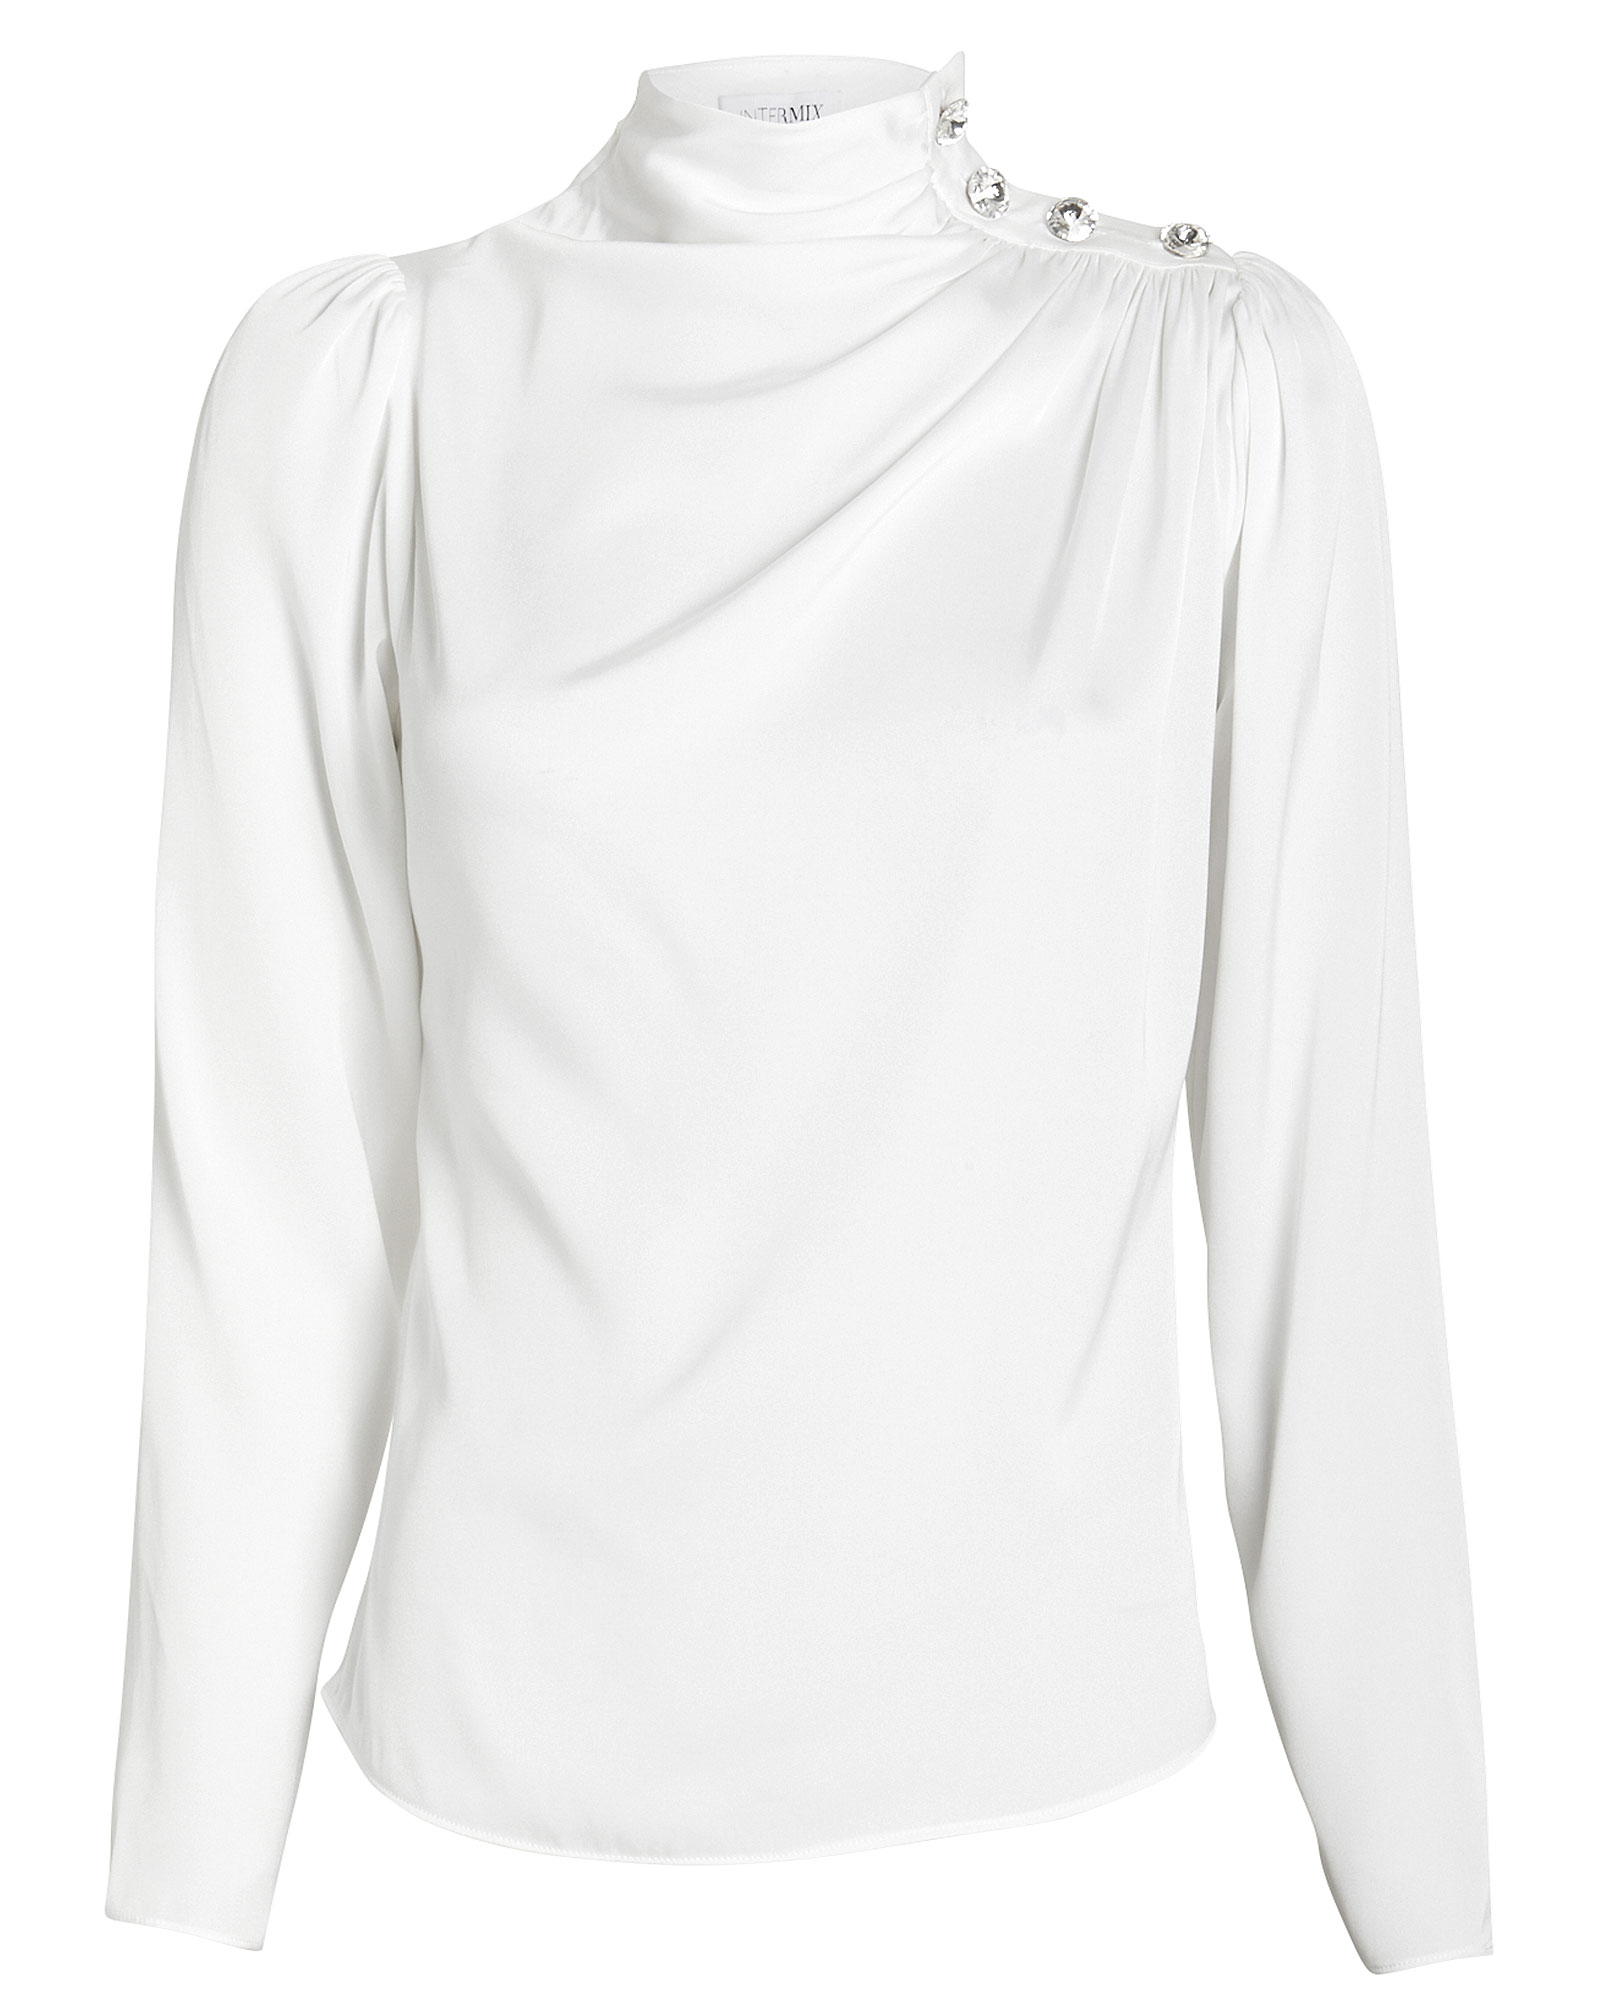 INTERMIX Charity Embellished Silk Blouse in white | INTERMIX®